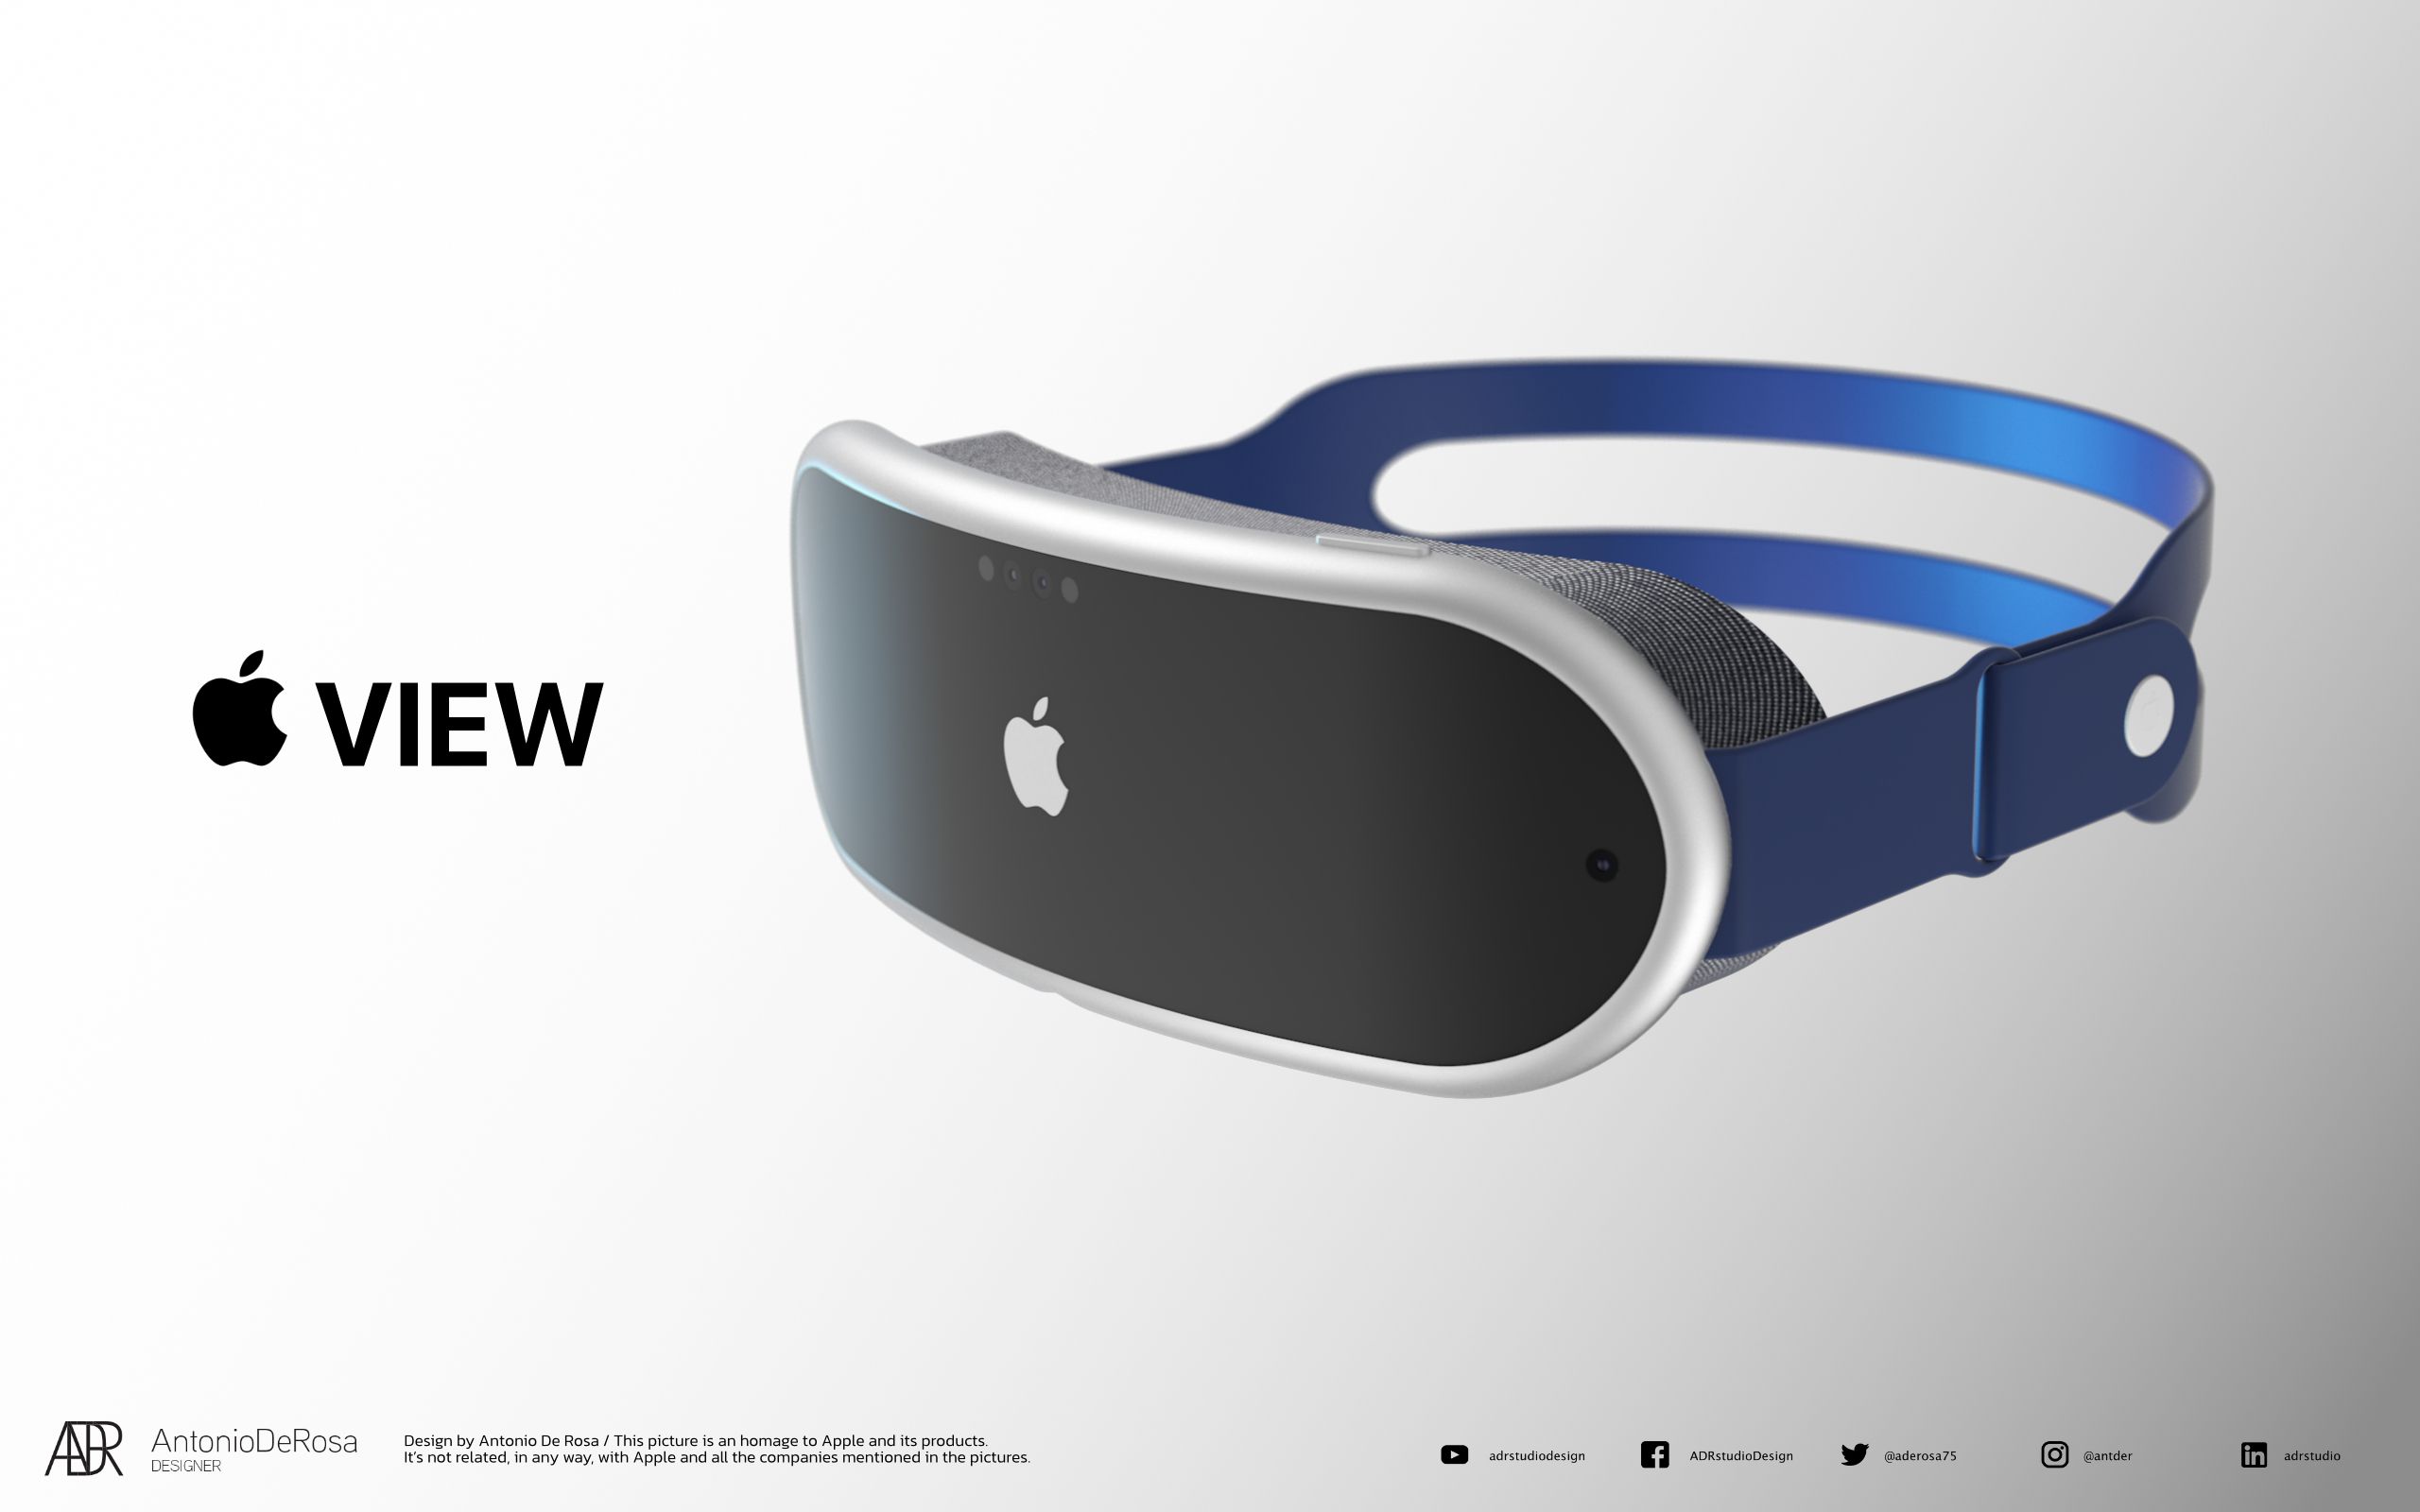 First Apple Mixed Reality Headset Rumored to Focus on Gaming, Media, and Communication